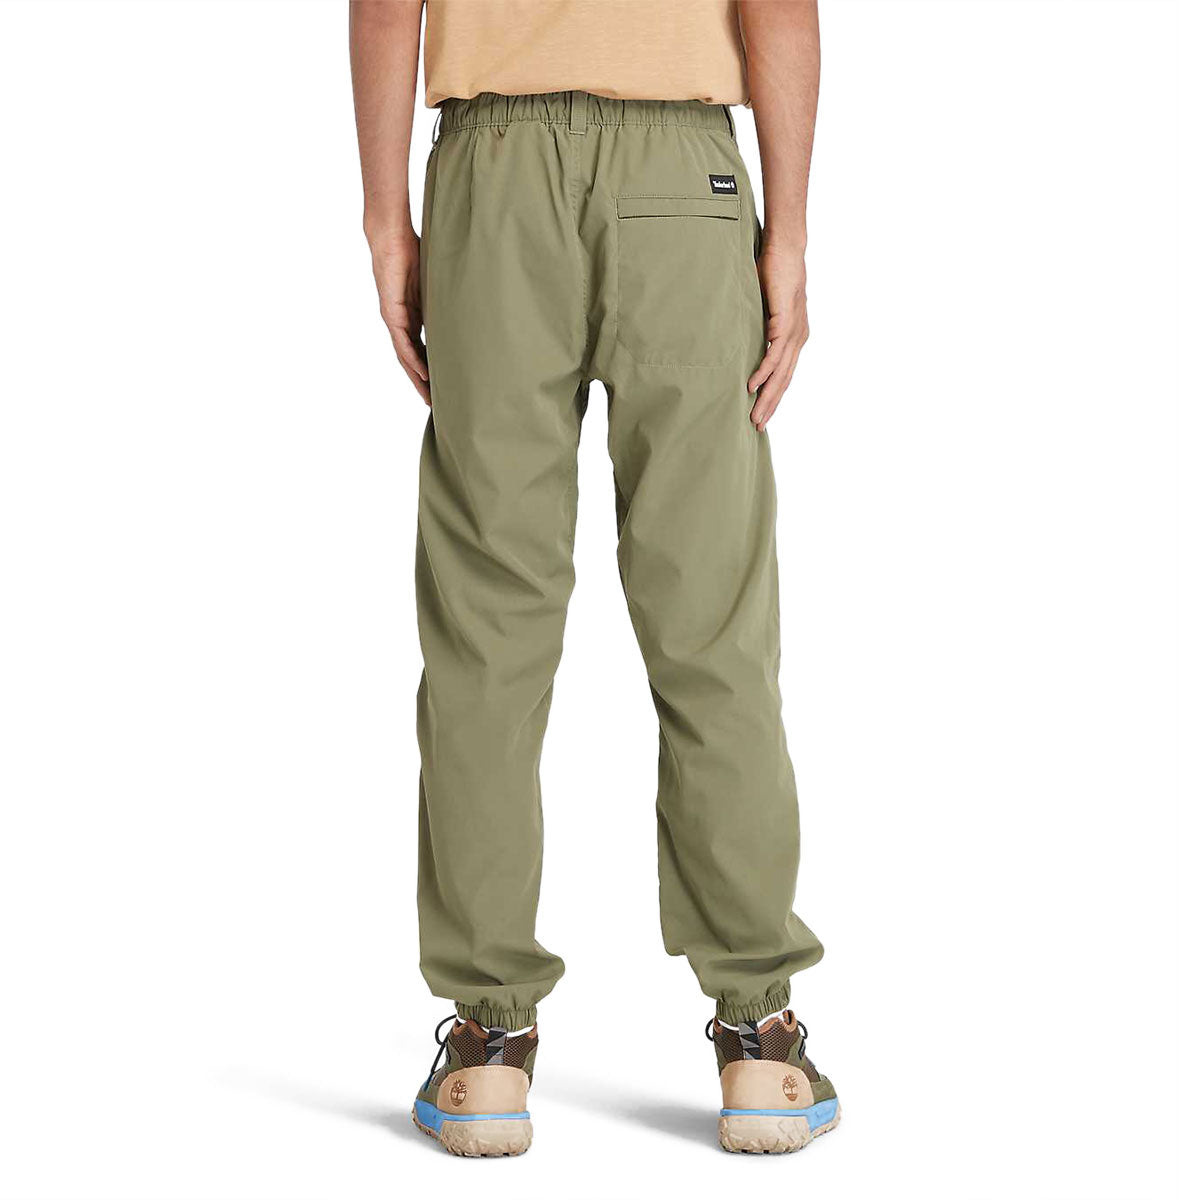 Timberland Dwr Jogger  Pants - Cassel Earth image 2